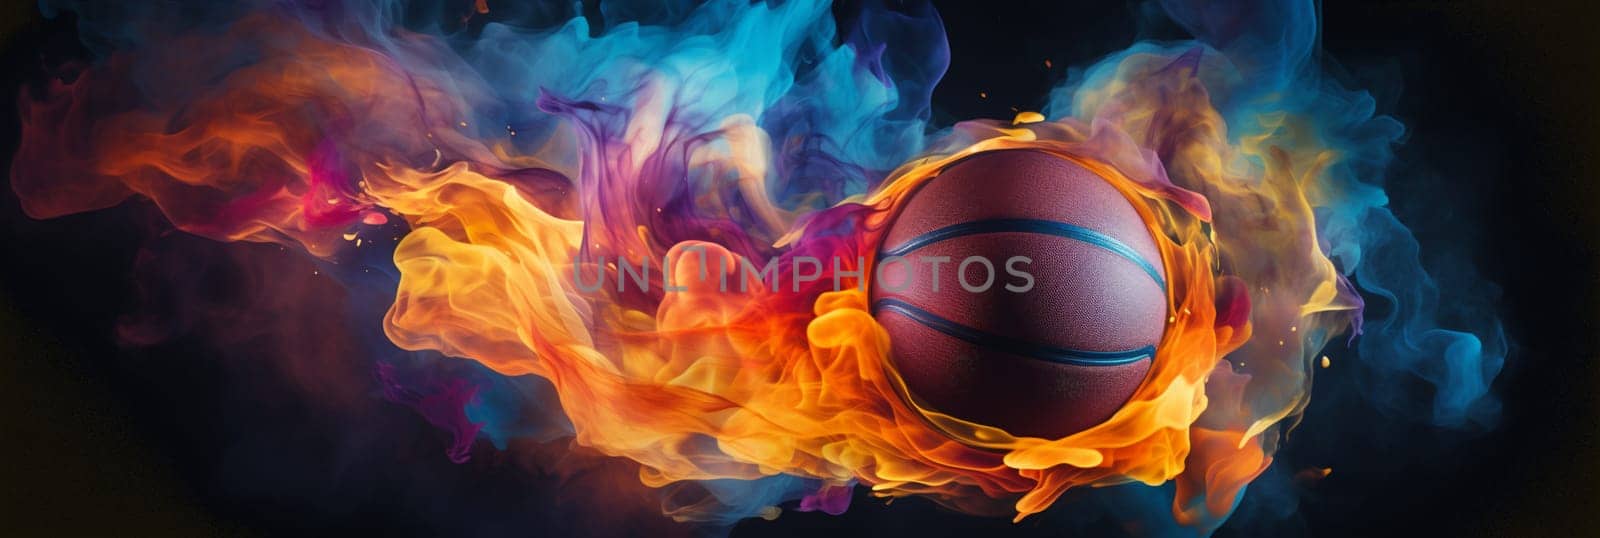 basketball on fire in basketball court stadium with lights in the field shining by Andelov13